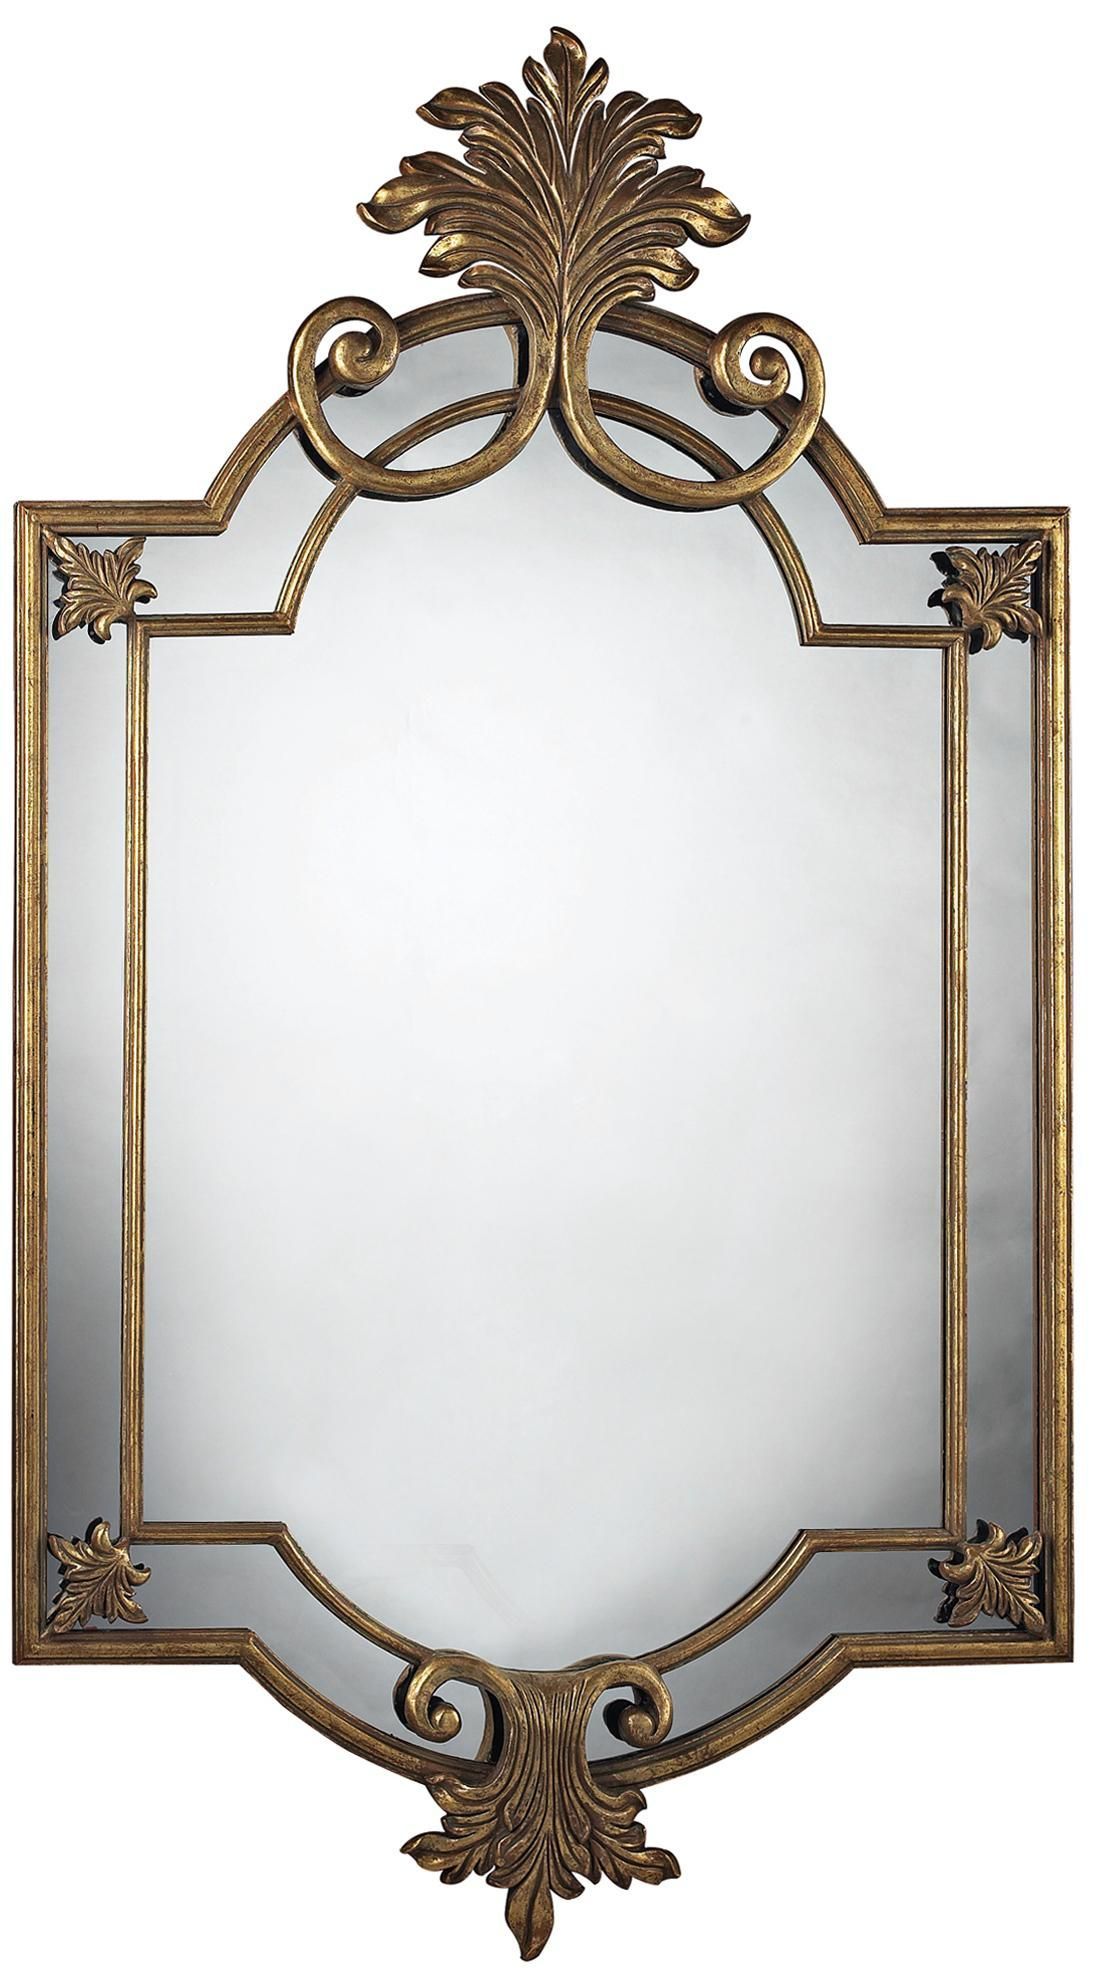 Gretna 60" High Gold Leaf Wall Mirror – #x7163 | Lamps Plus | Mirror Pertaining To Gold Leaf Metal Wall Mirrors (View 2 of 15)